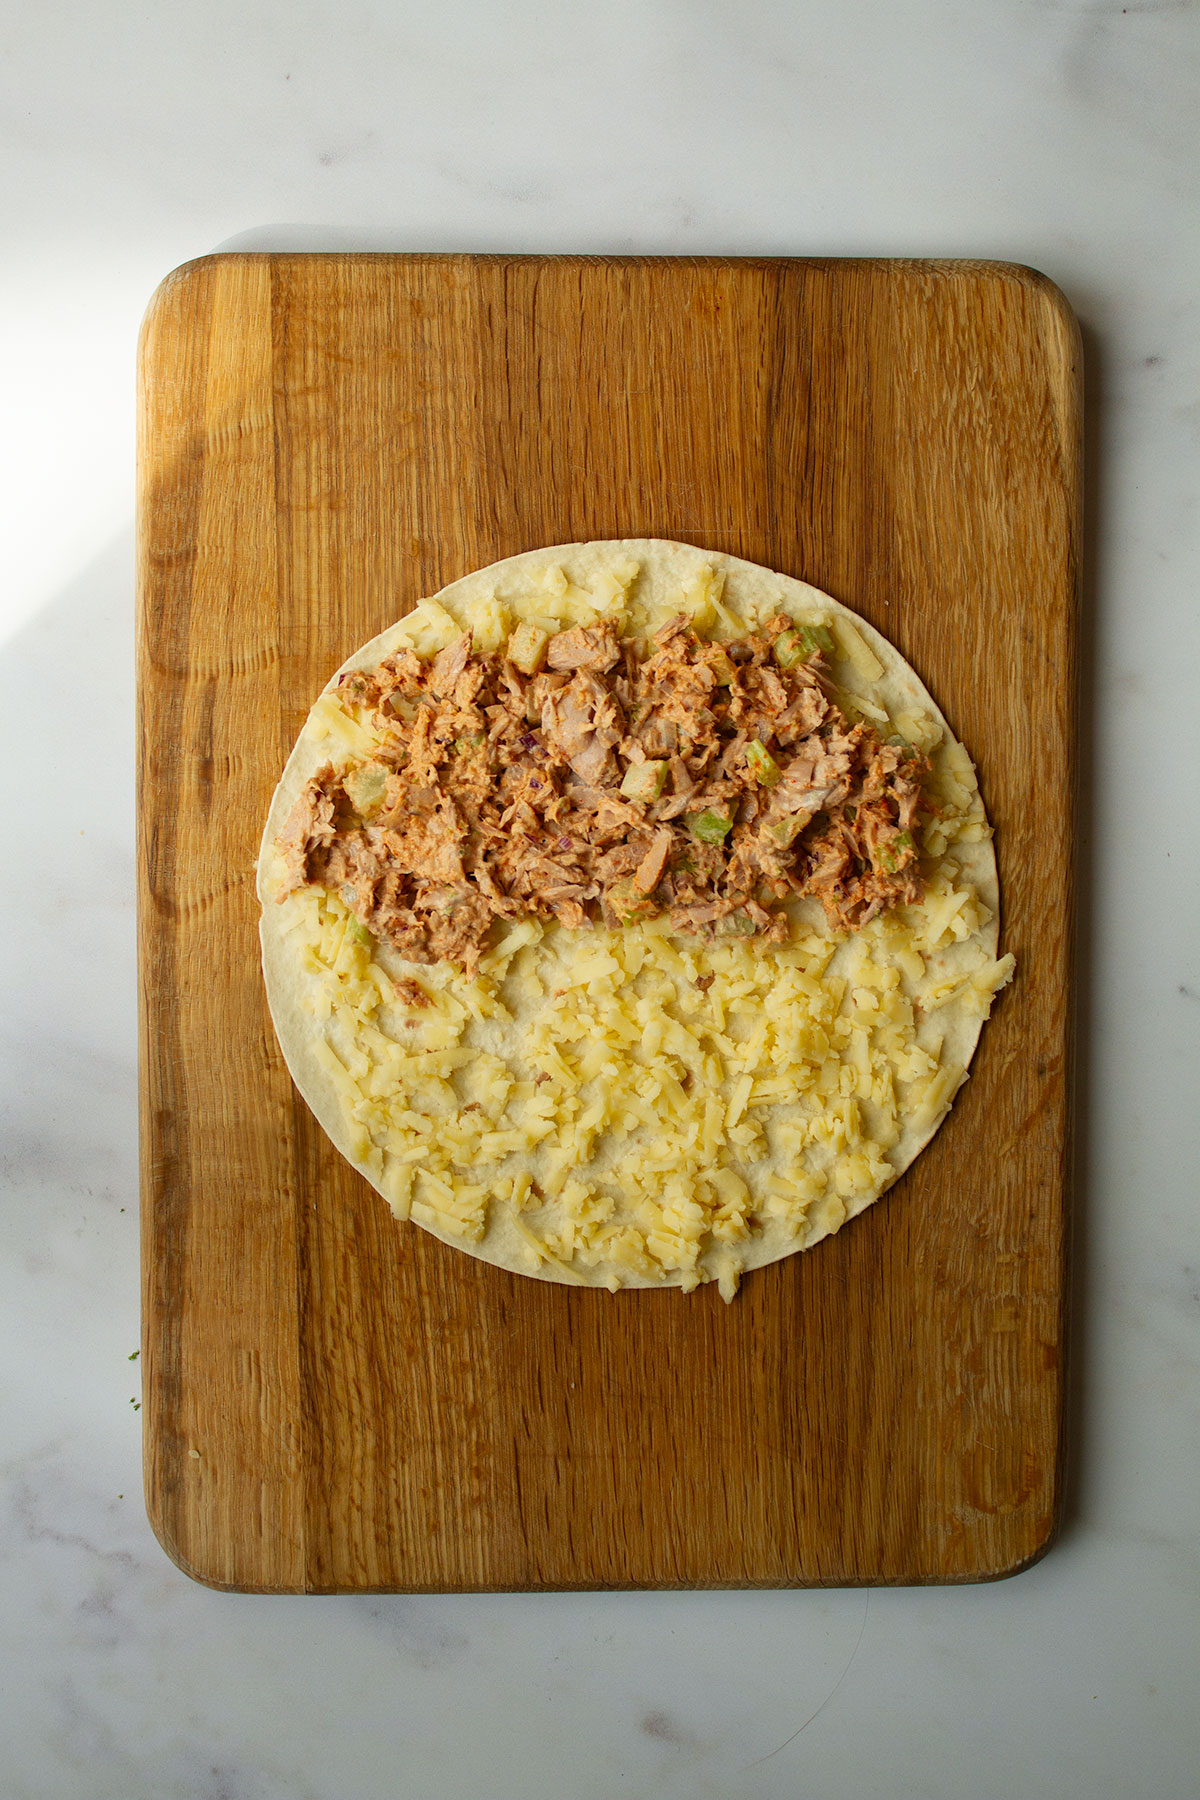 A quesadilla wrap on the wooden board topped with tuna mayo and grated cheese.